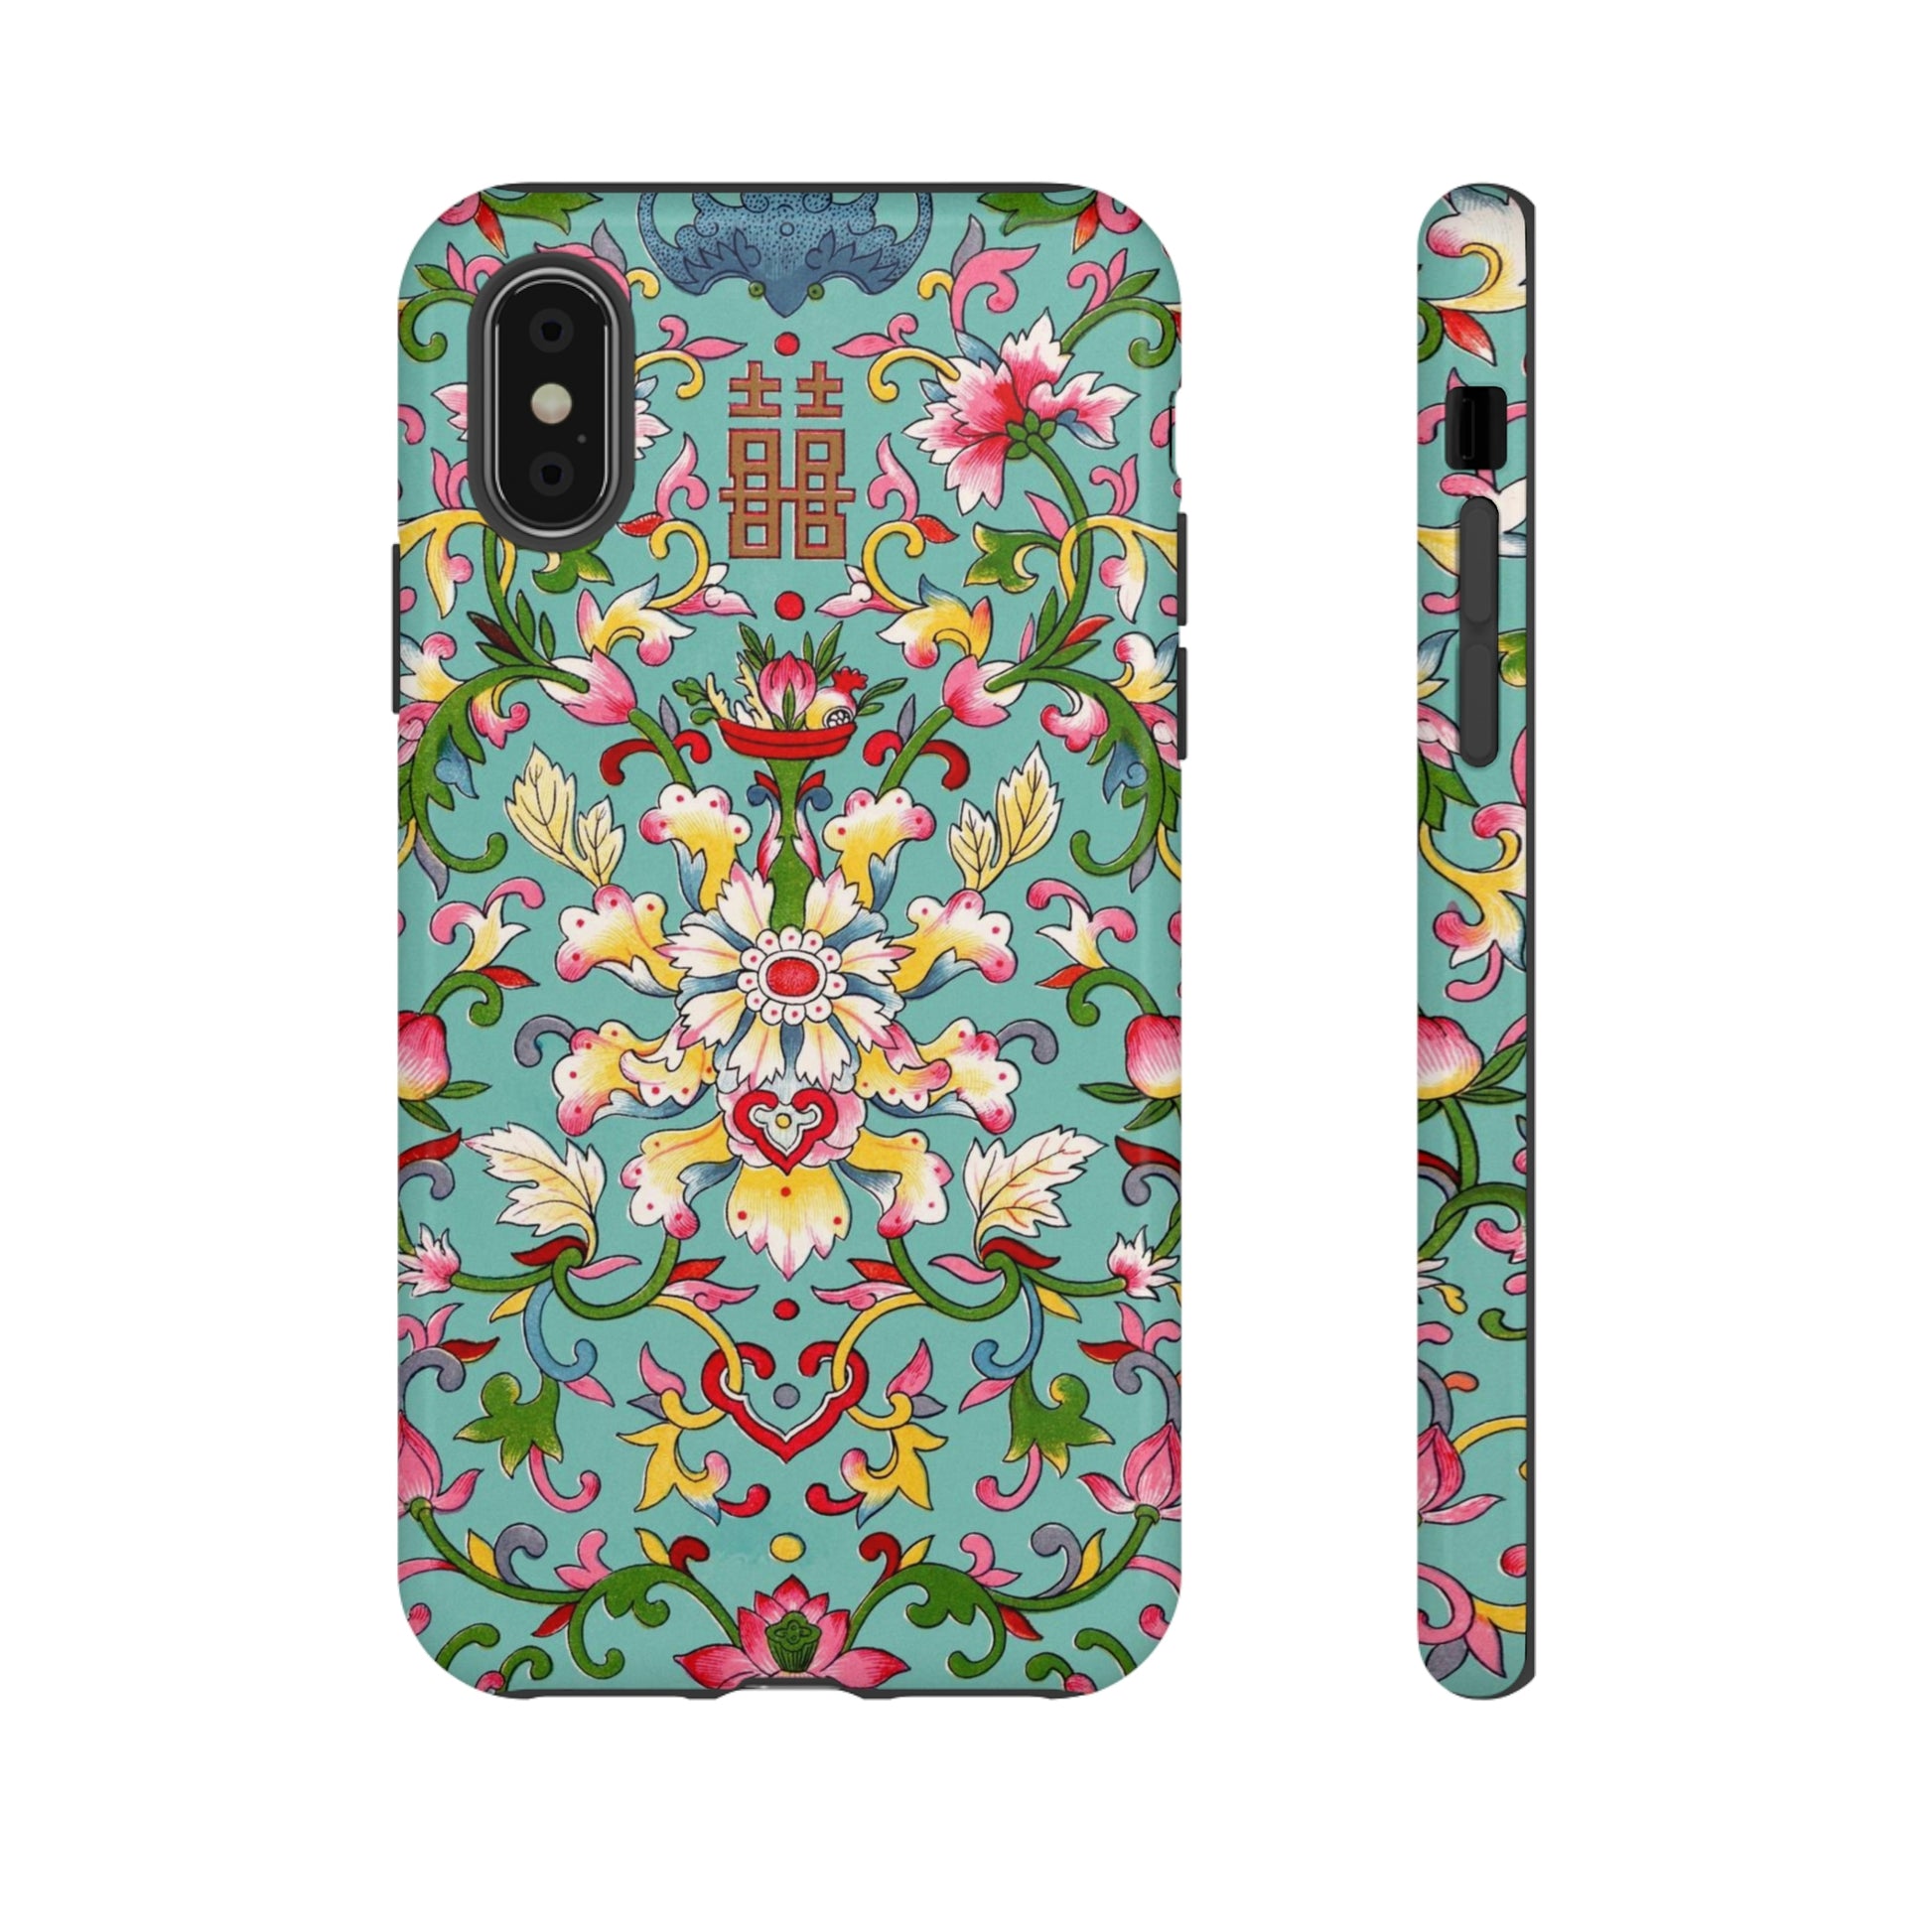 Floral Family Phone Case - BRYKNOLO LLC Phone Case iPhone X / Glossy